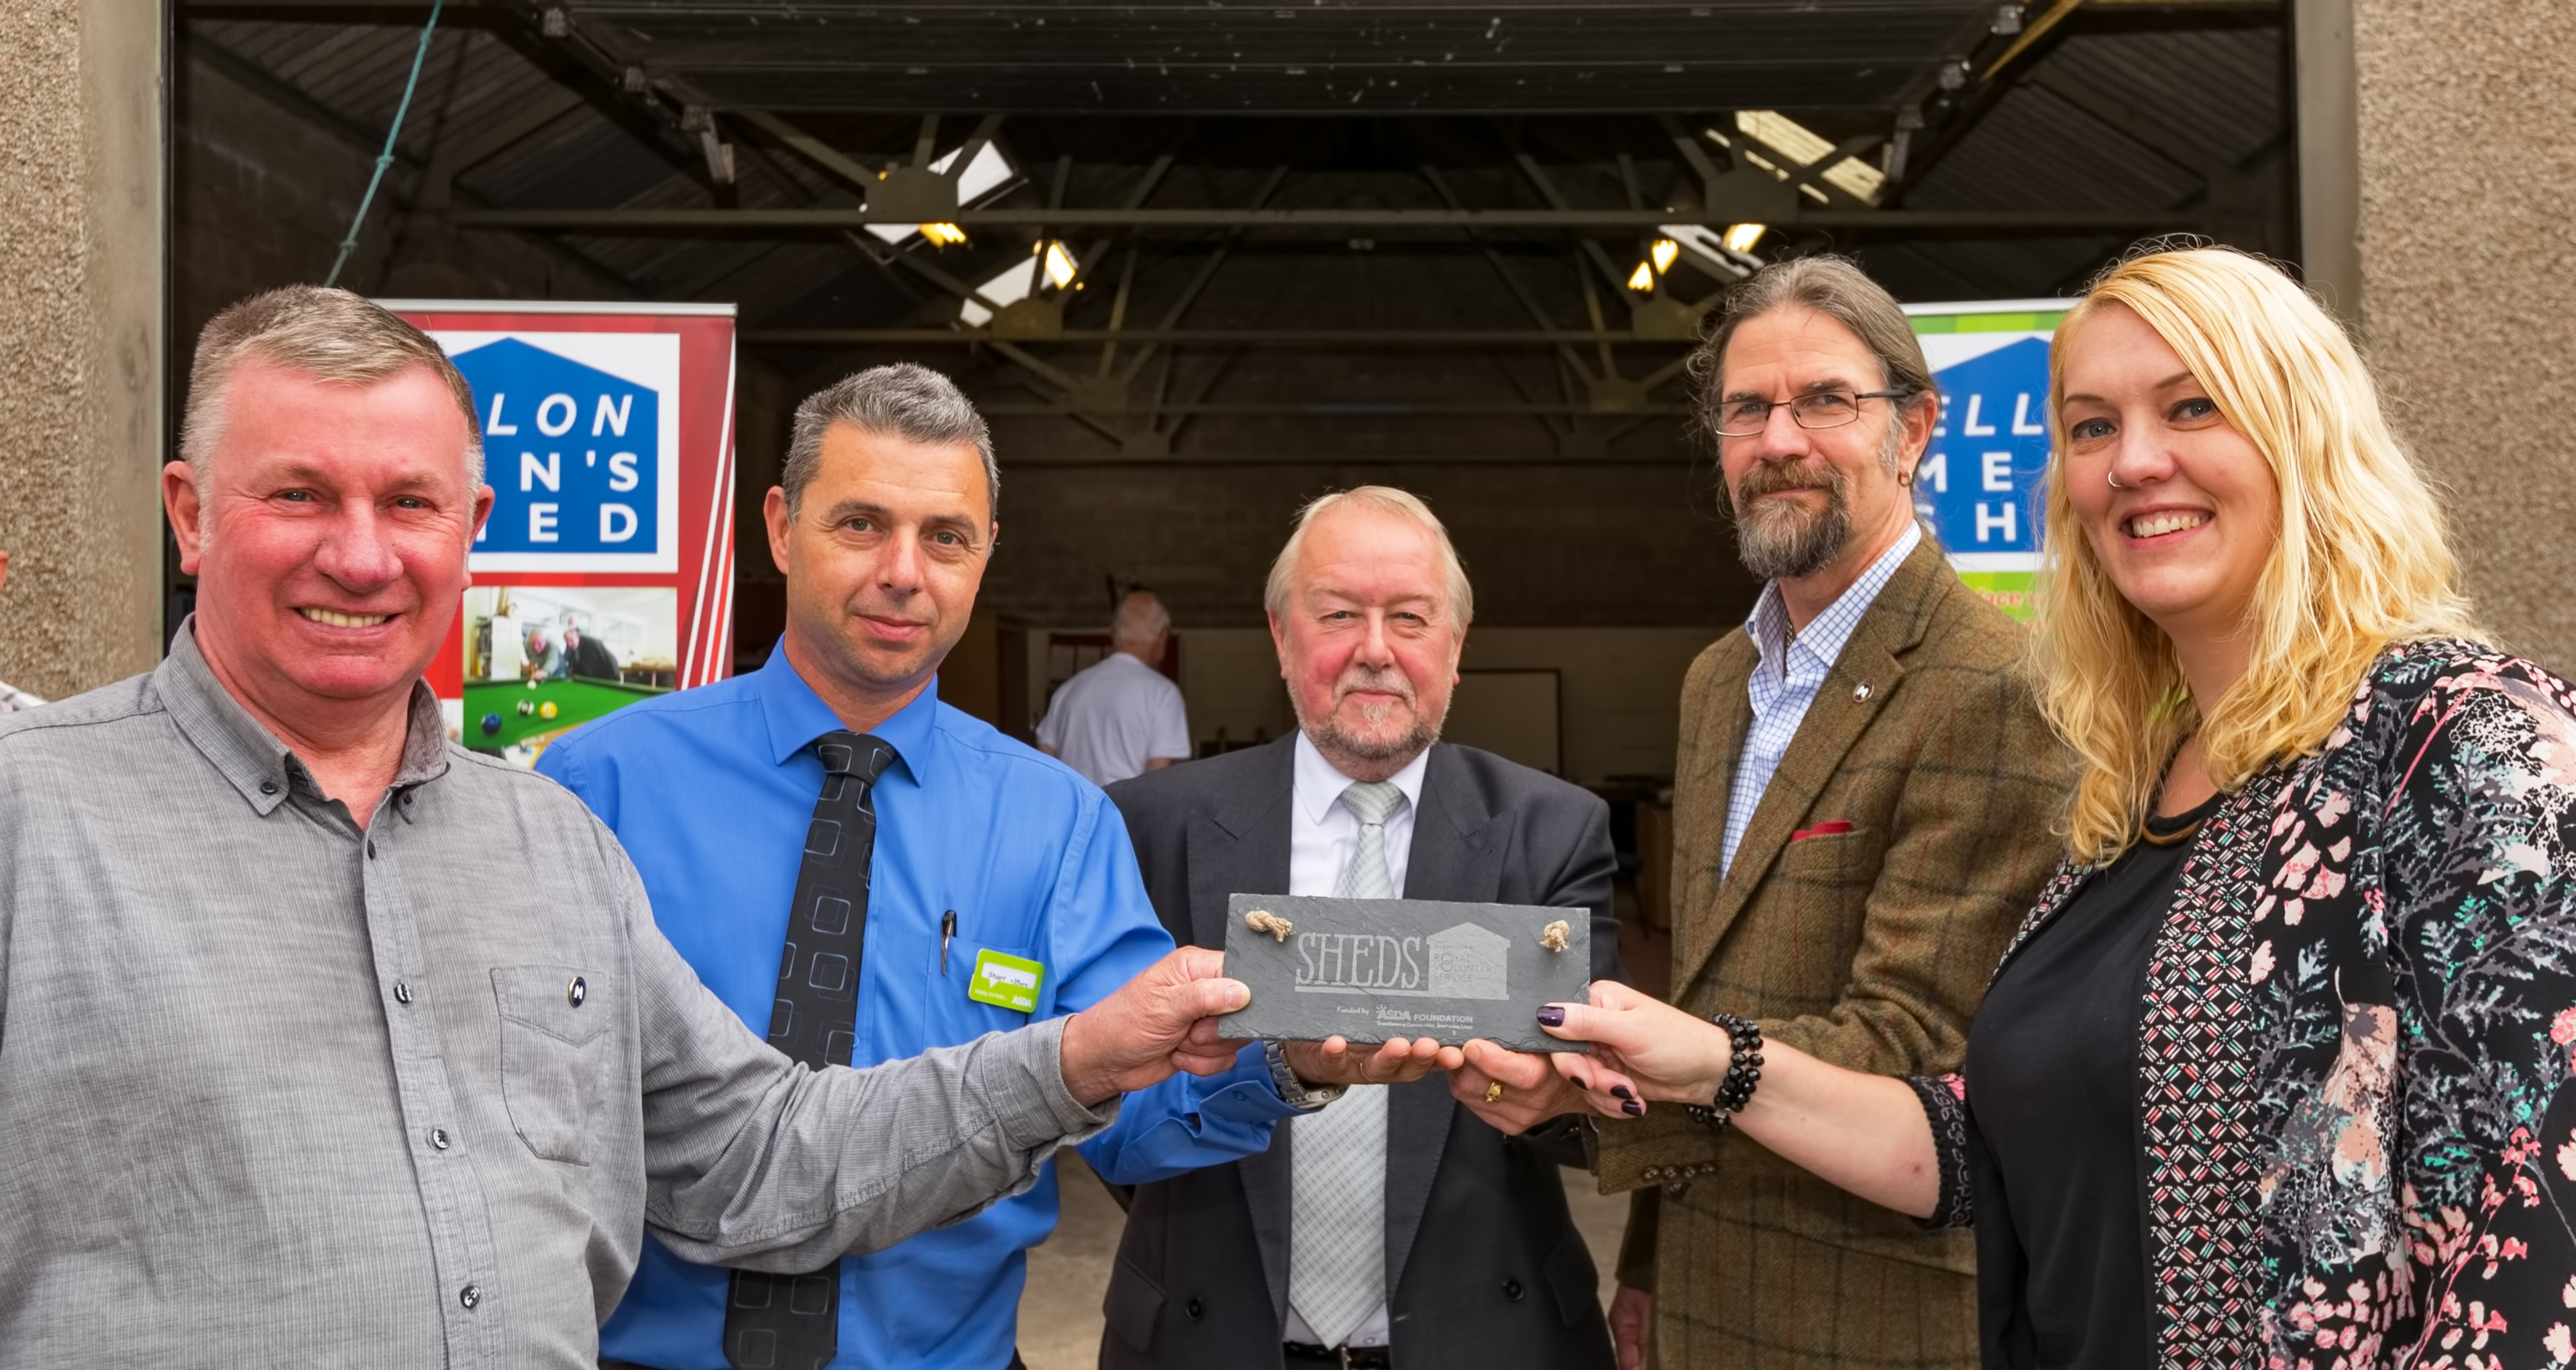 Colin Grieve of Ellon Mens Shed with Stuart Wright, Asda, Councilor Rob Merson Ellon District,Jason Schroeder, Chaiman of the Scottish Mens Sheds and Jo Phillips of the RVS